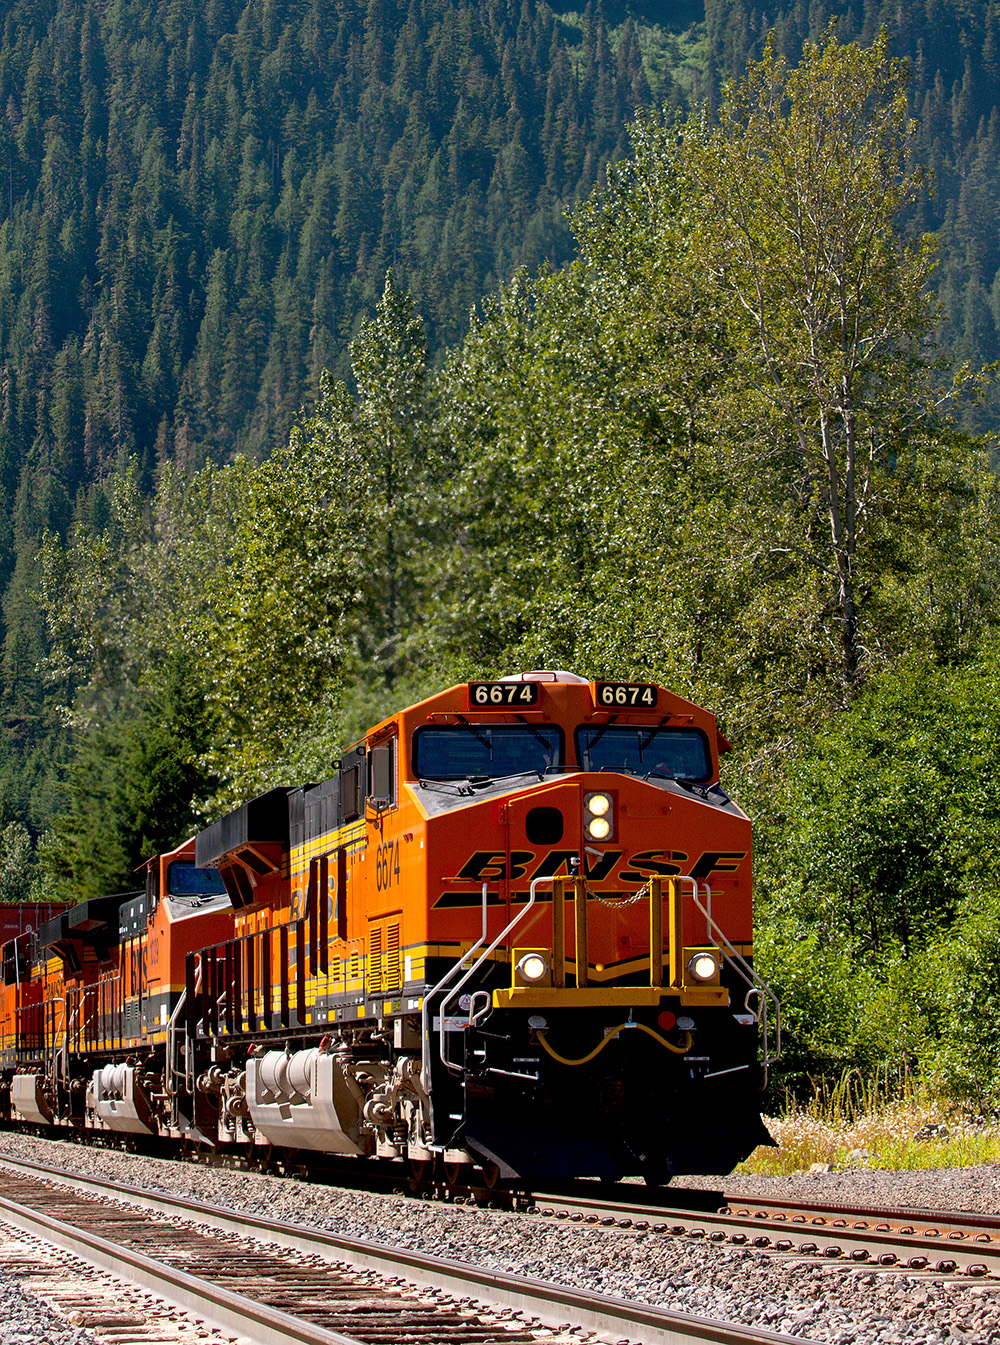 BNSF Introduces New Intermodal Service Schedules In its Northern Region